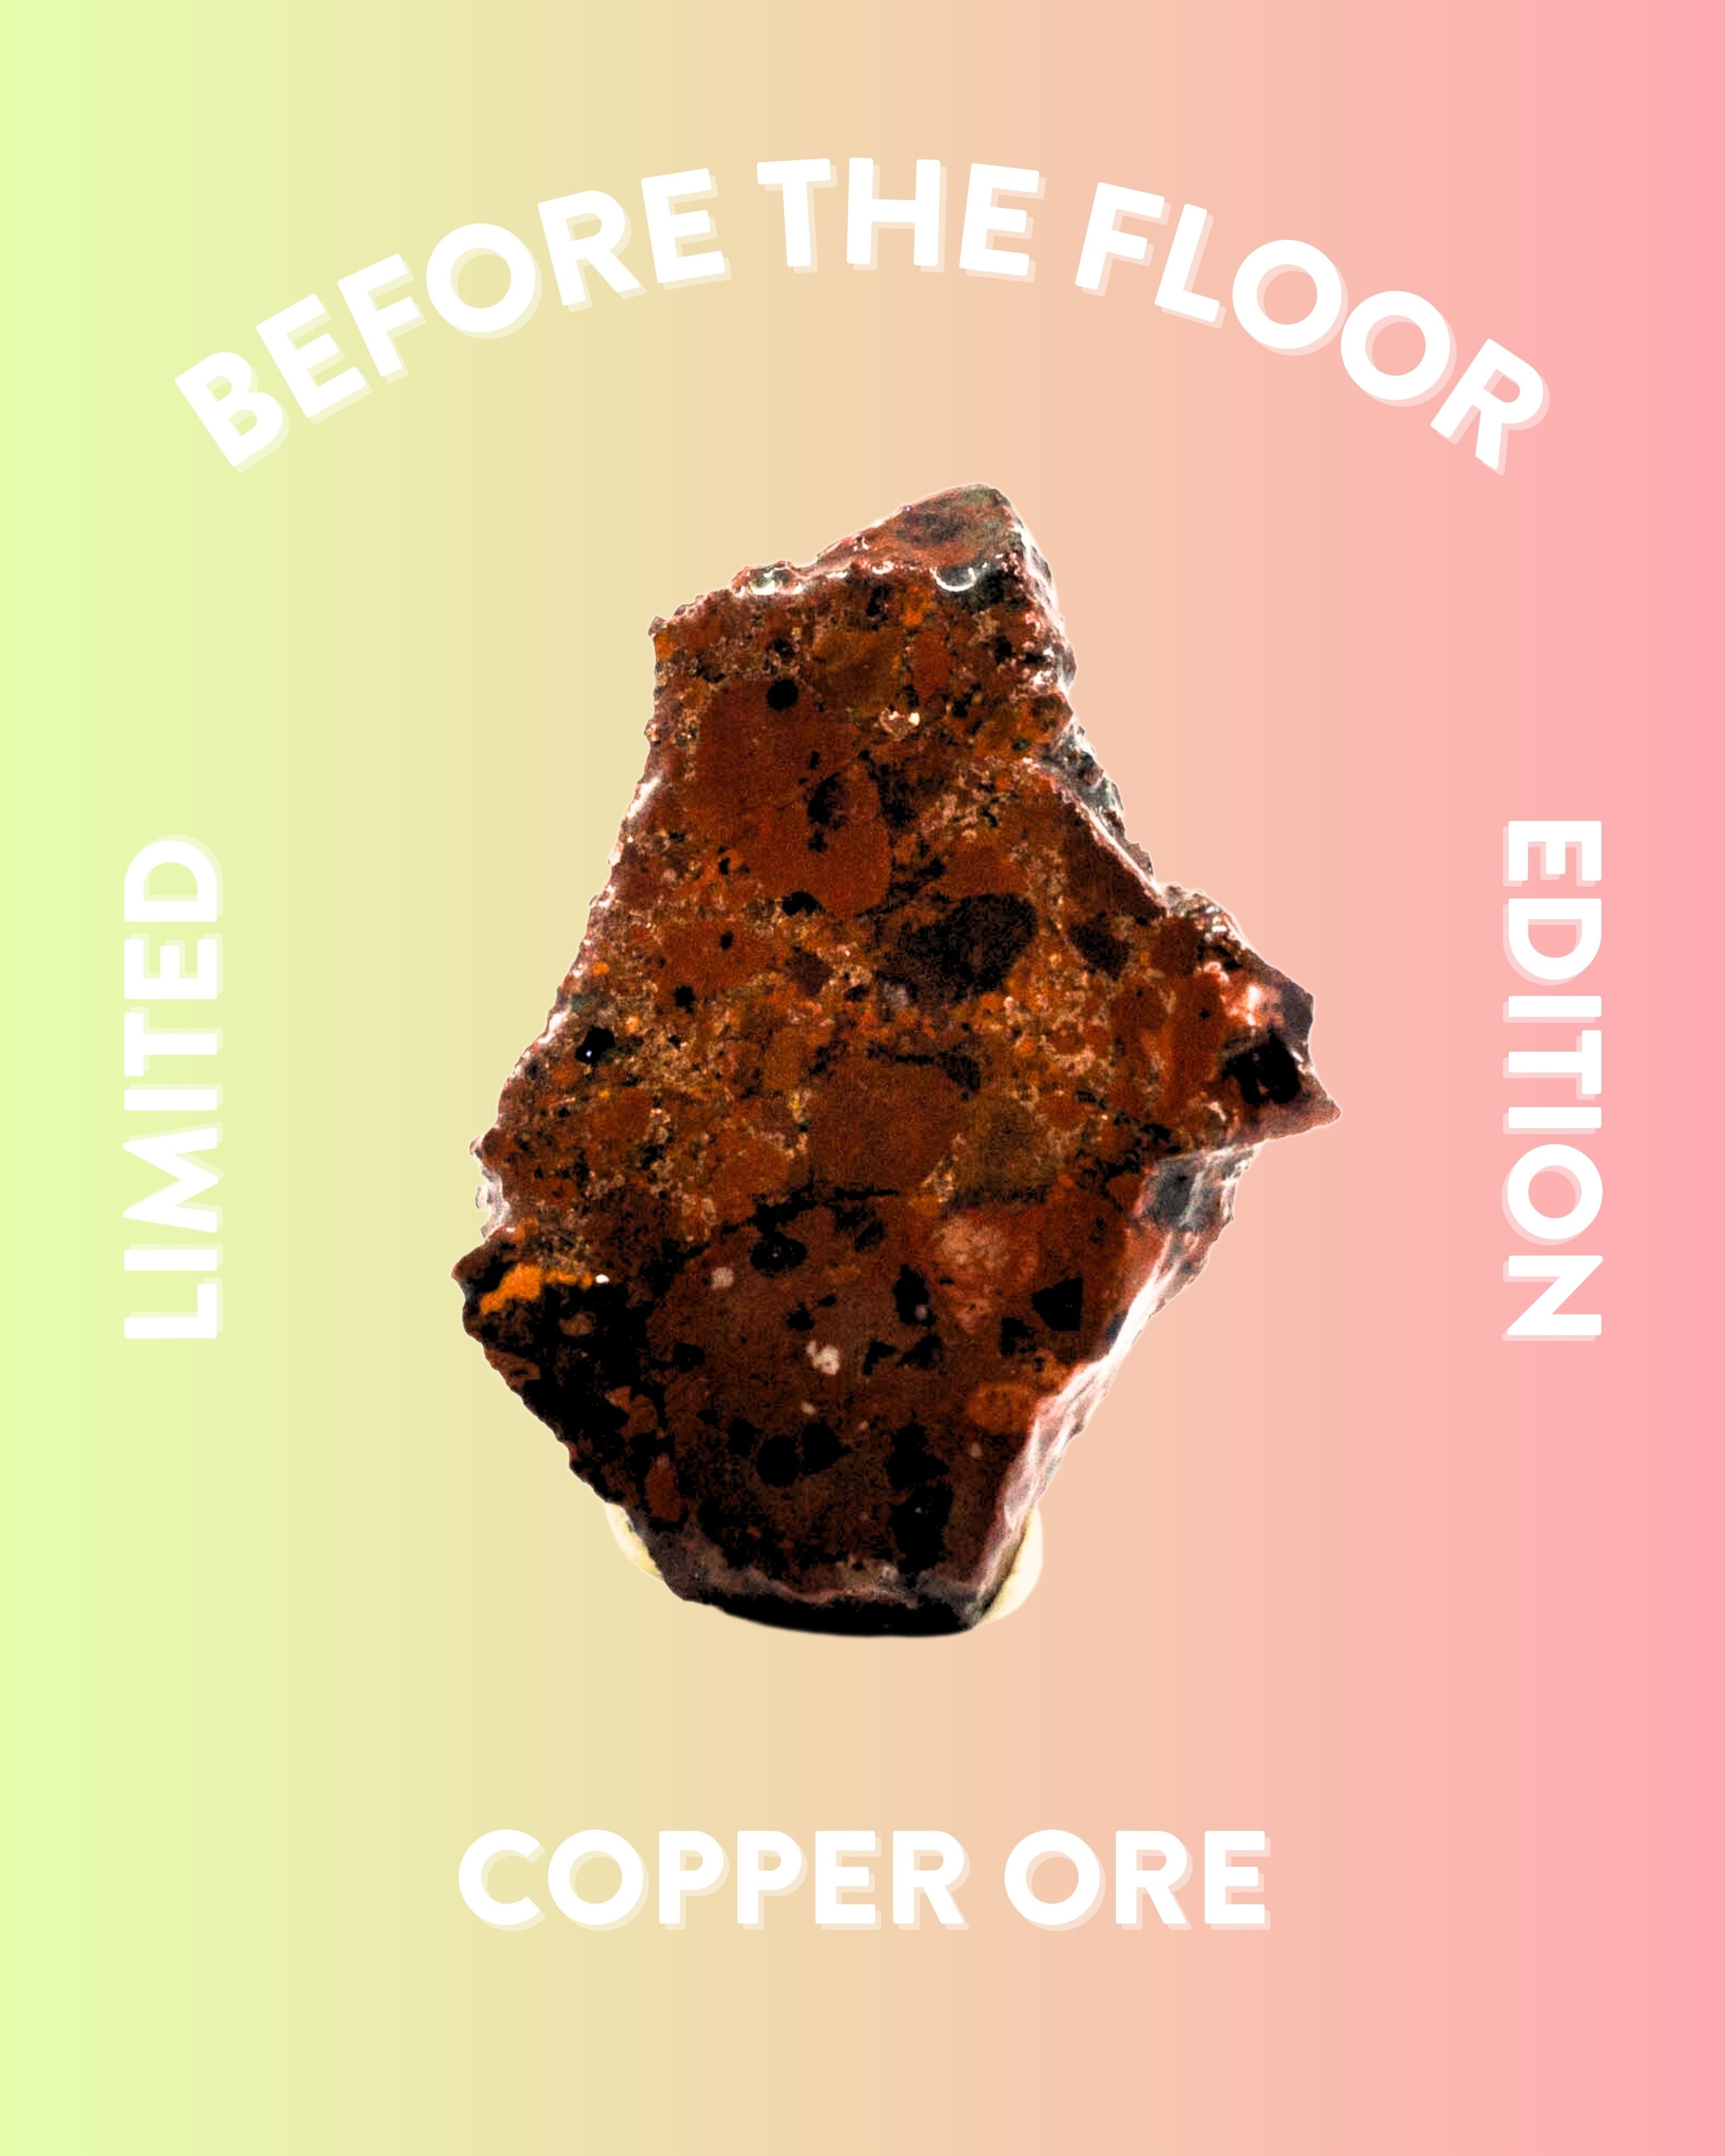 Copper Ore Slab - Before the Floor